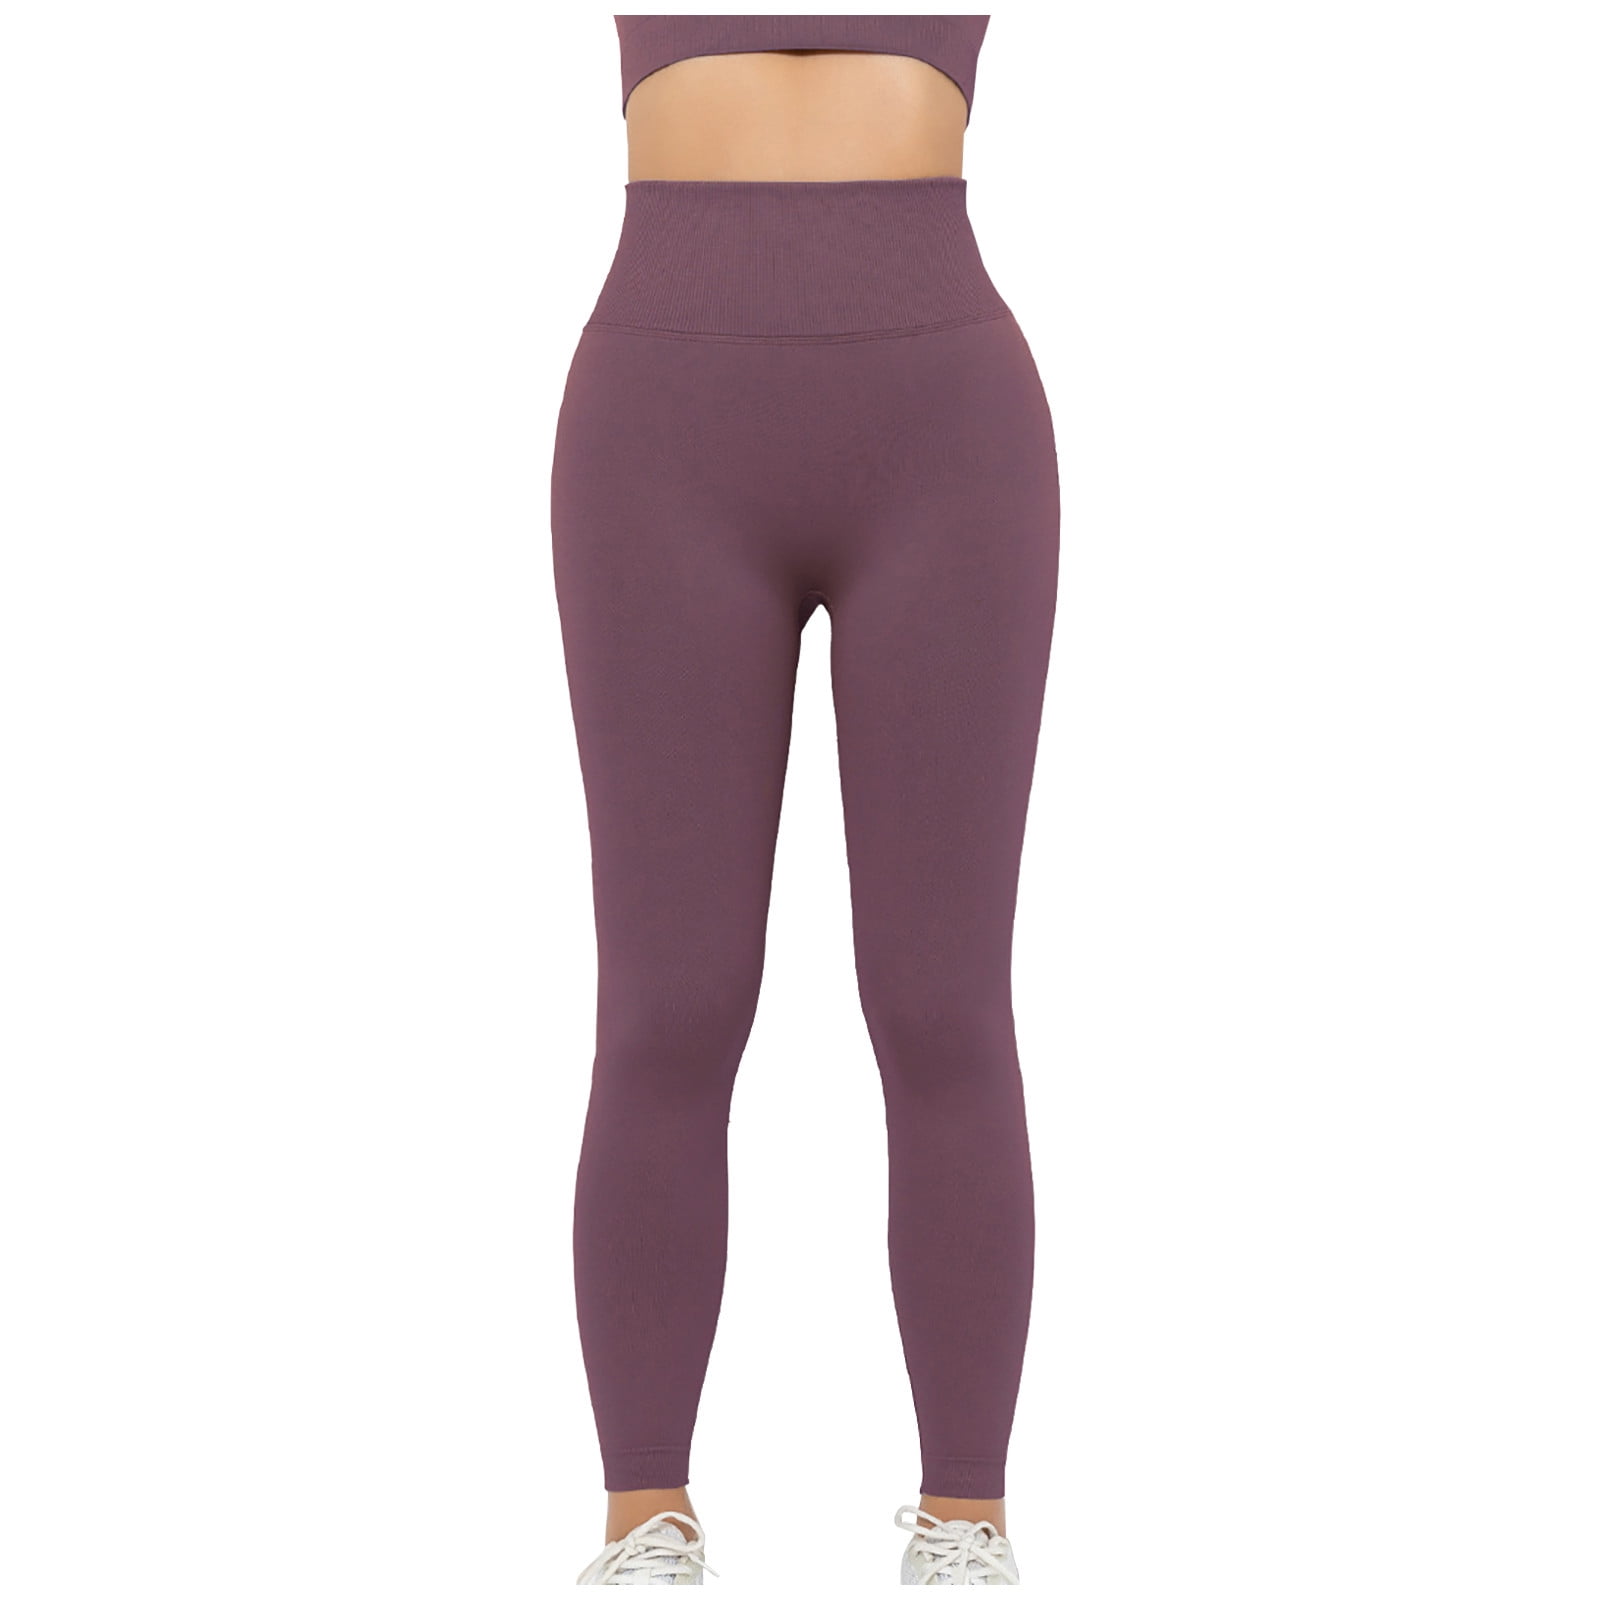 Women's Buttery Soft High Waisted Yoga Pants Tummy Control